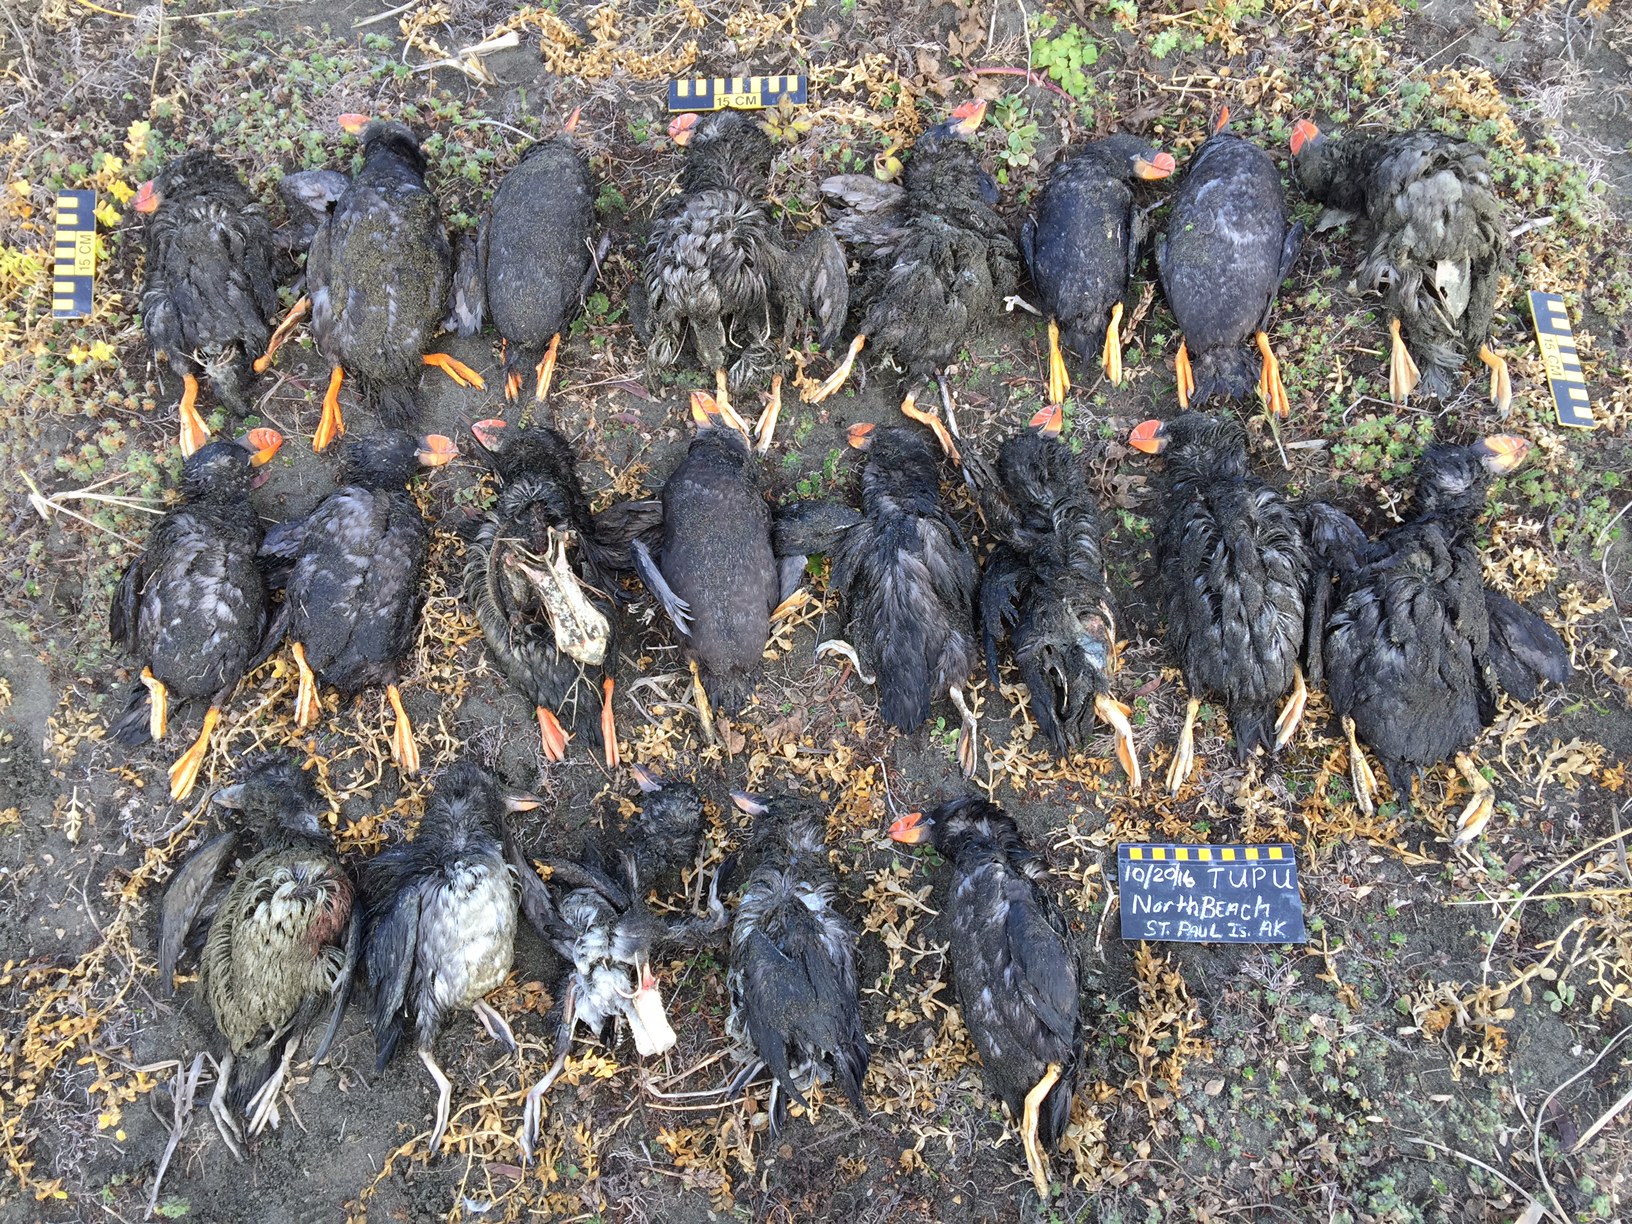 Dead tufted puffins were collected and photograph  Oct. 19 and 20, 2016 on St. Paul Island. (Paul Melovidov / Aleut Community of St. Paul Ecosystem Conservation Office)